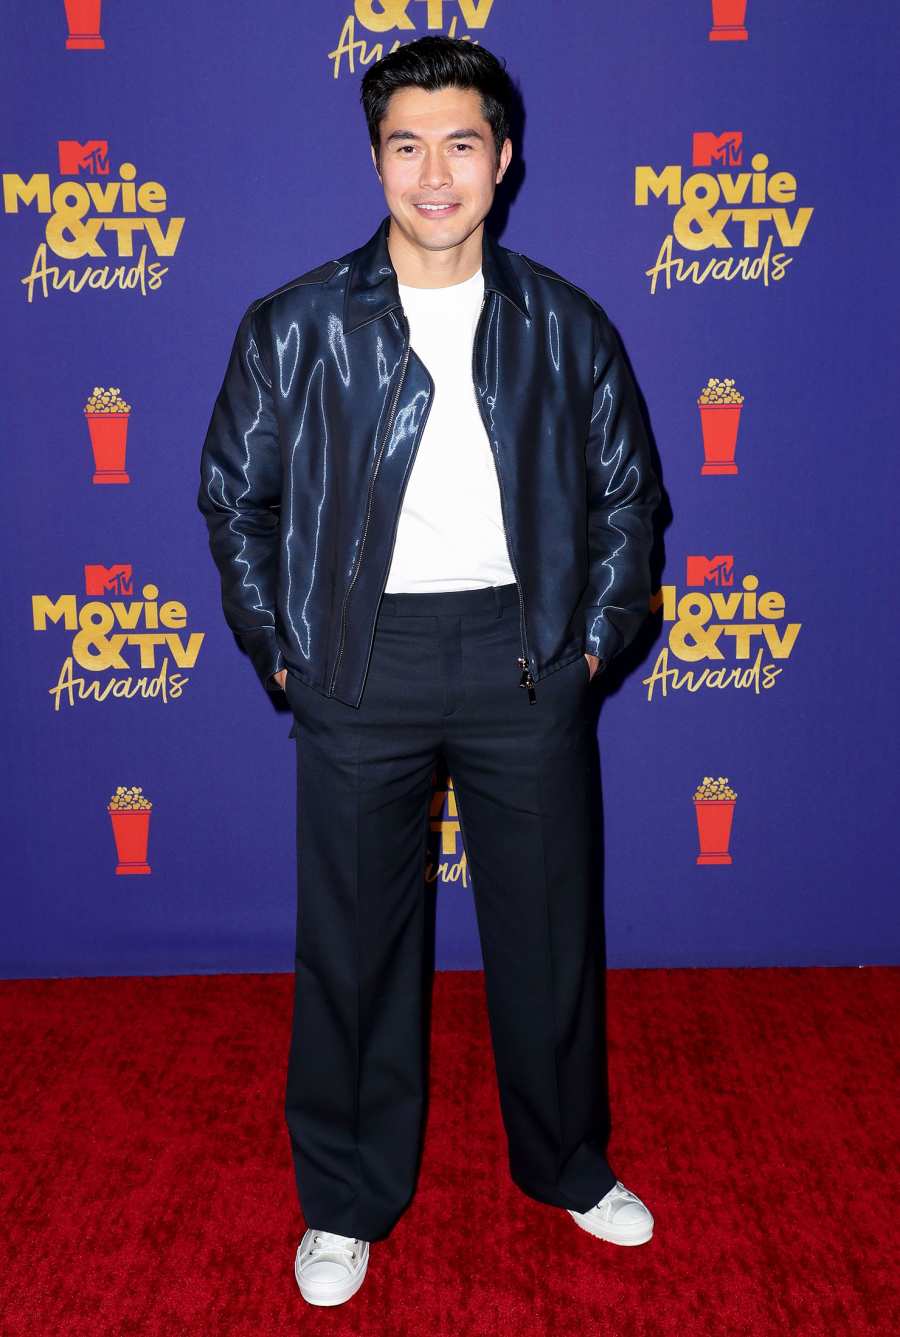 The 8 Hottest Hunks at the MTV Movie & TV Awards